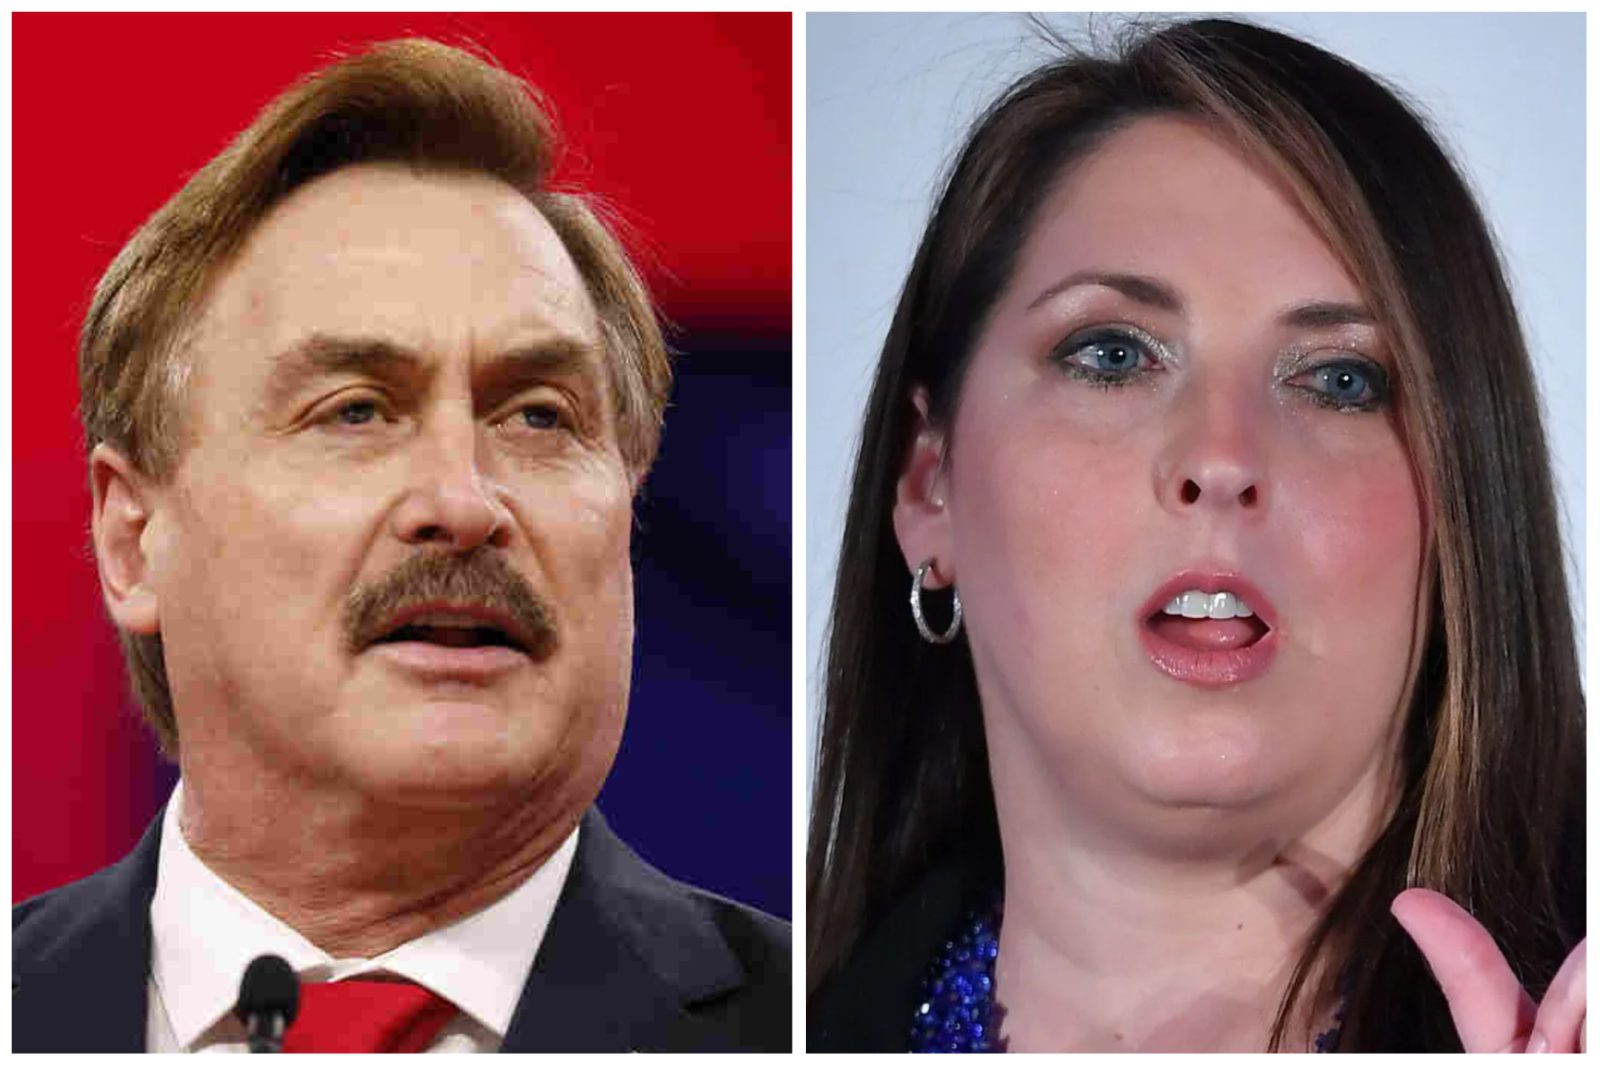 MyPillow Founder Mike Lindell is Considering a Run for RNC Chair Against Ronna McDaniel - Big League Politics